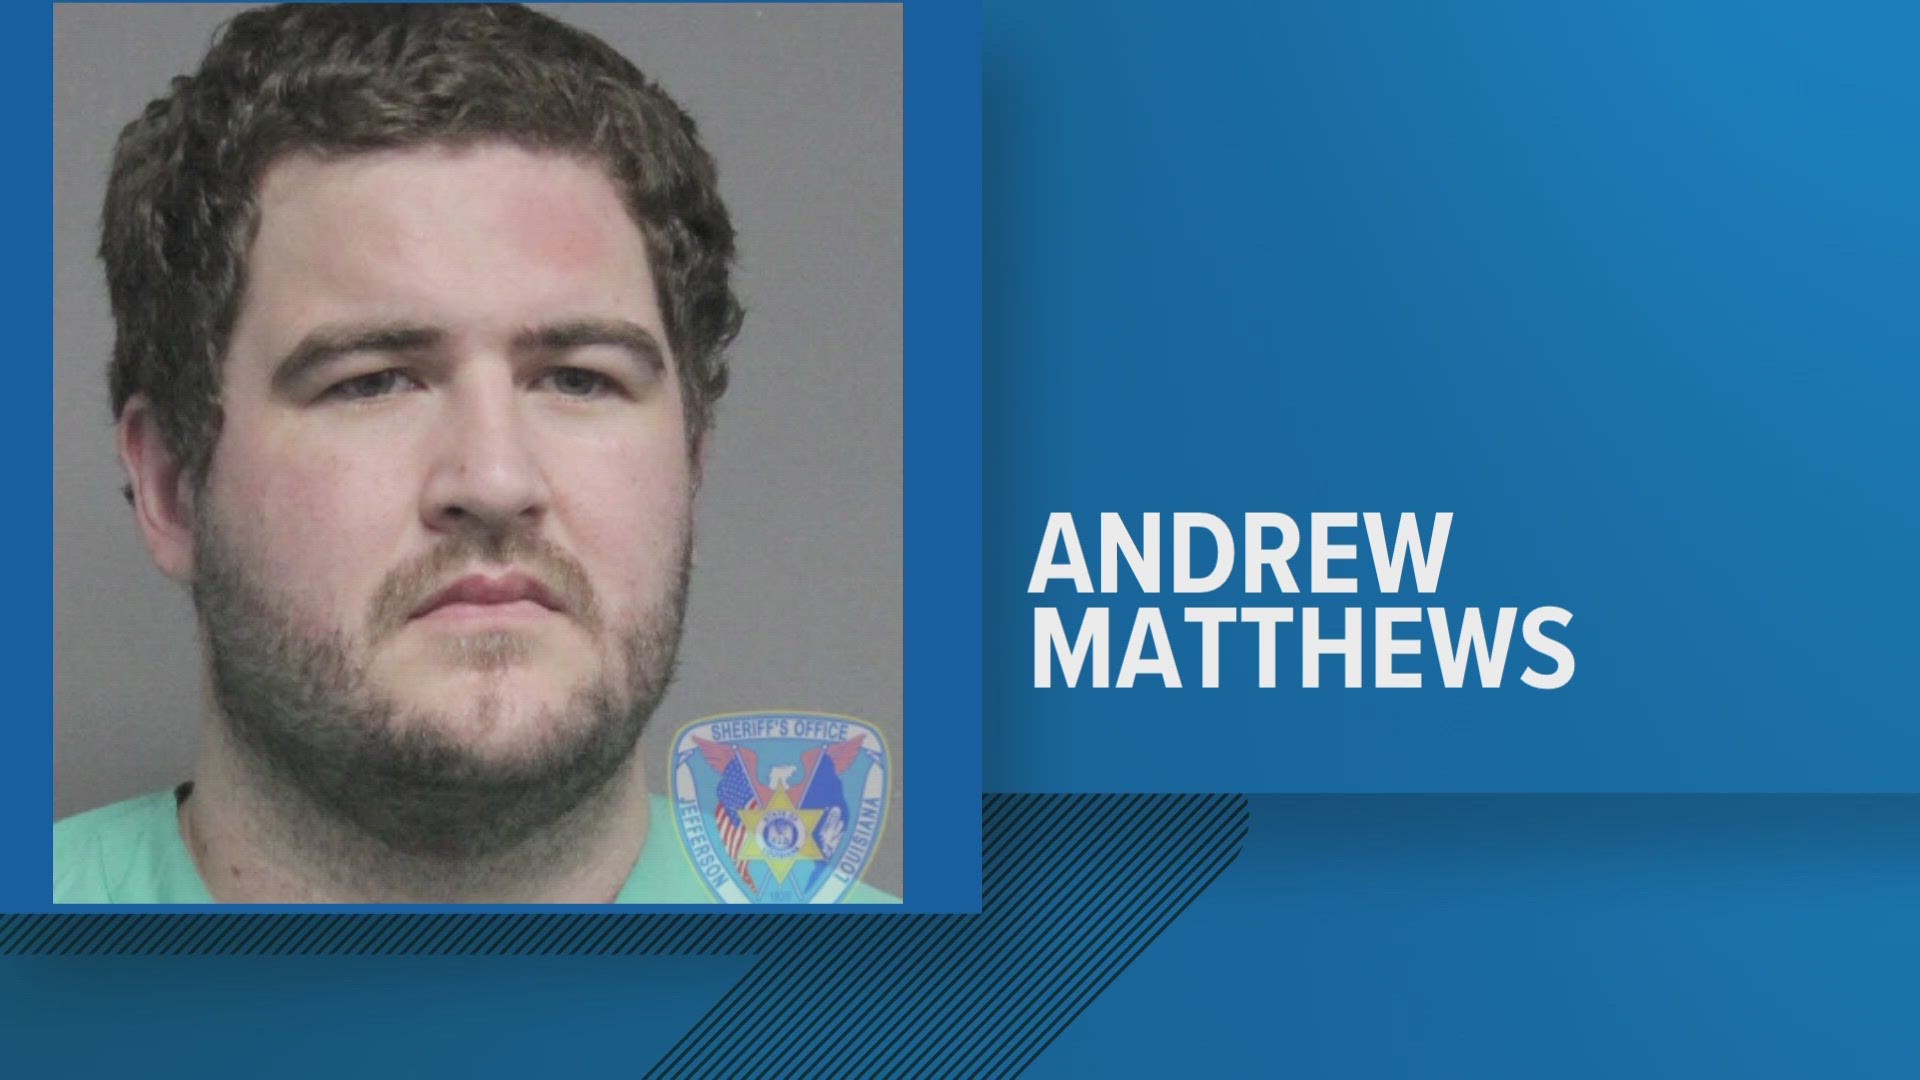 31-year-old Andrew Matthews was arrested and charged with 10 counts of video voyeurism.